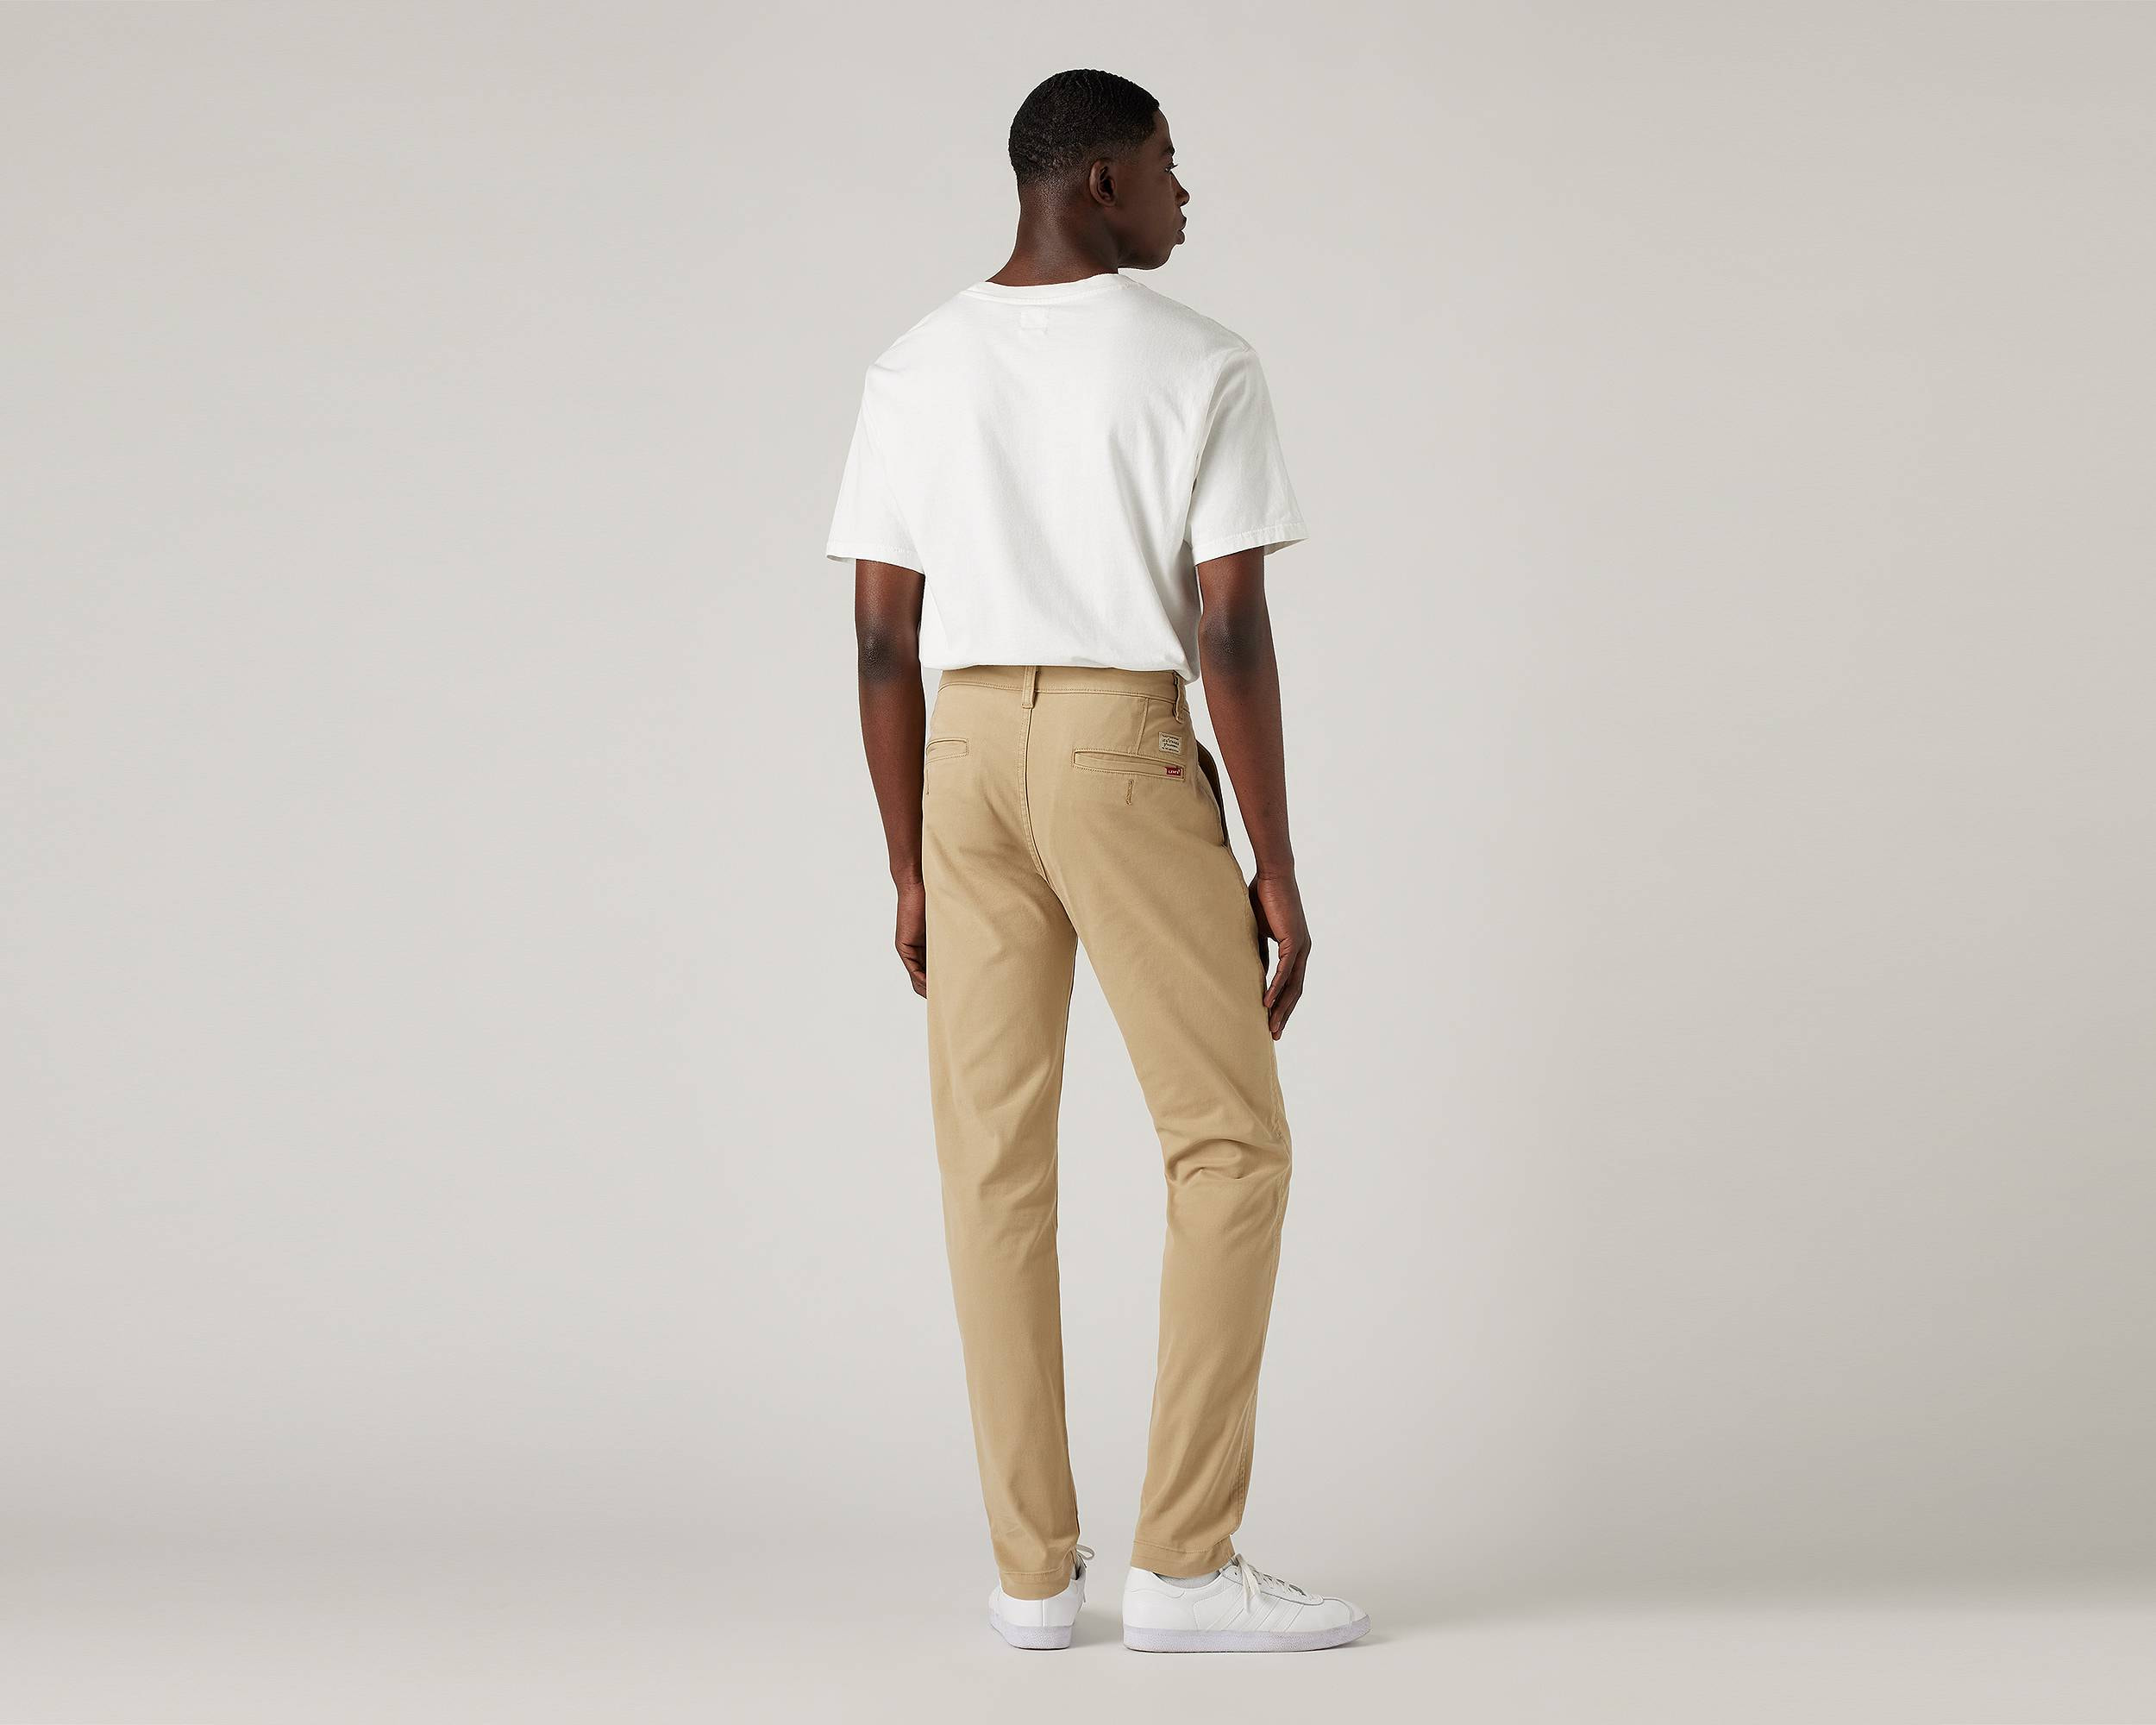 Levi's® XX Chino Slim Taper - Levi's Jeans, Jackets & Clothing